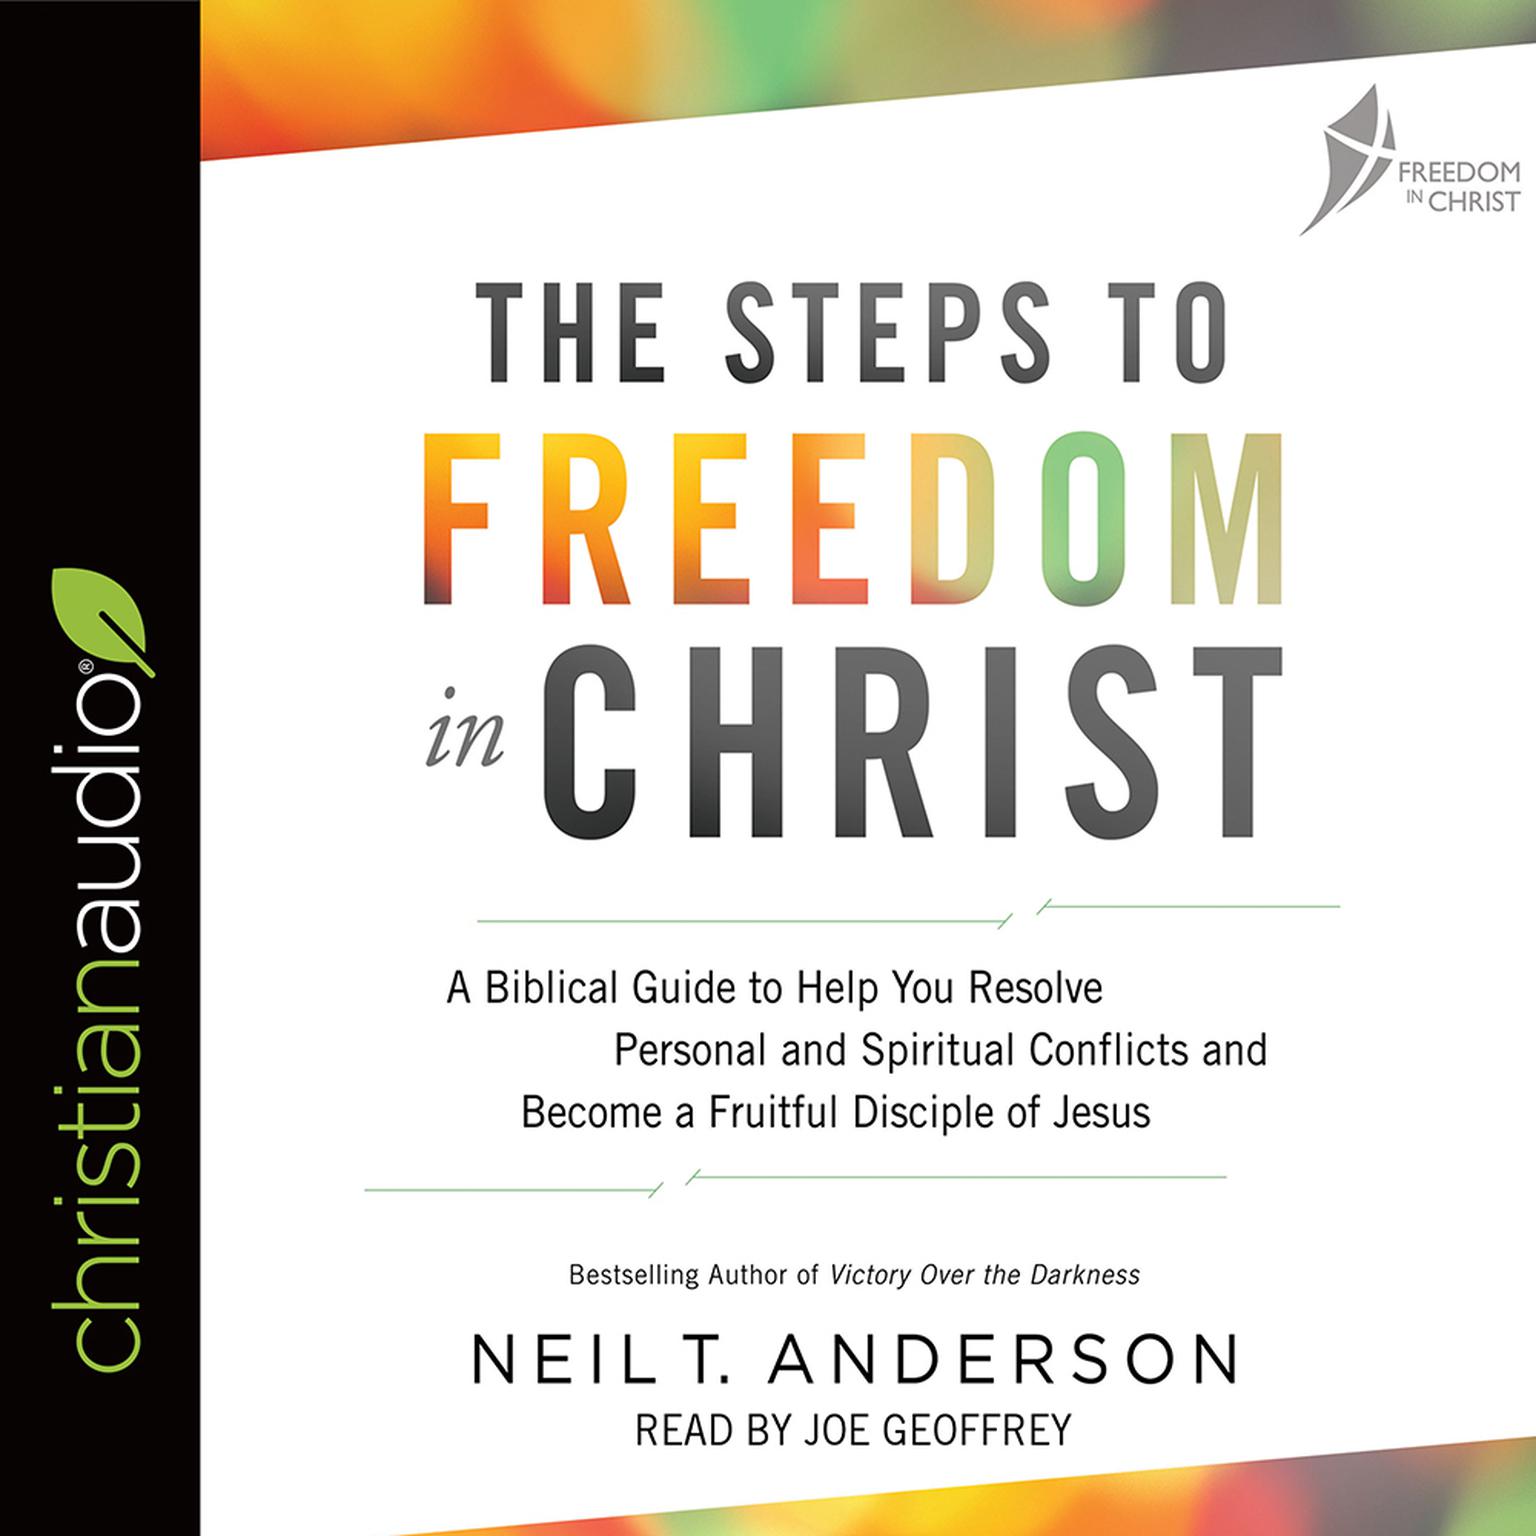 Steps to Freedom in Christ: A Biblical Guide to Help You Resolve Personal and Spiritual Conflicts and Become a Fruitful Disciple of Jesus Audiobook, by Neil T. Anderson